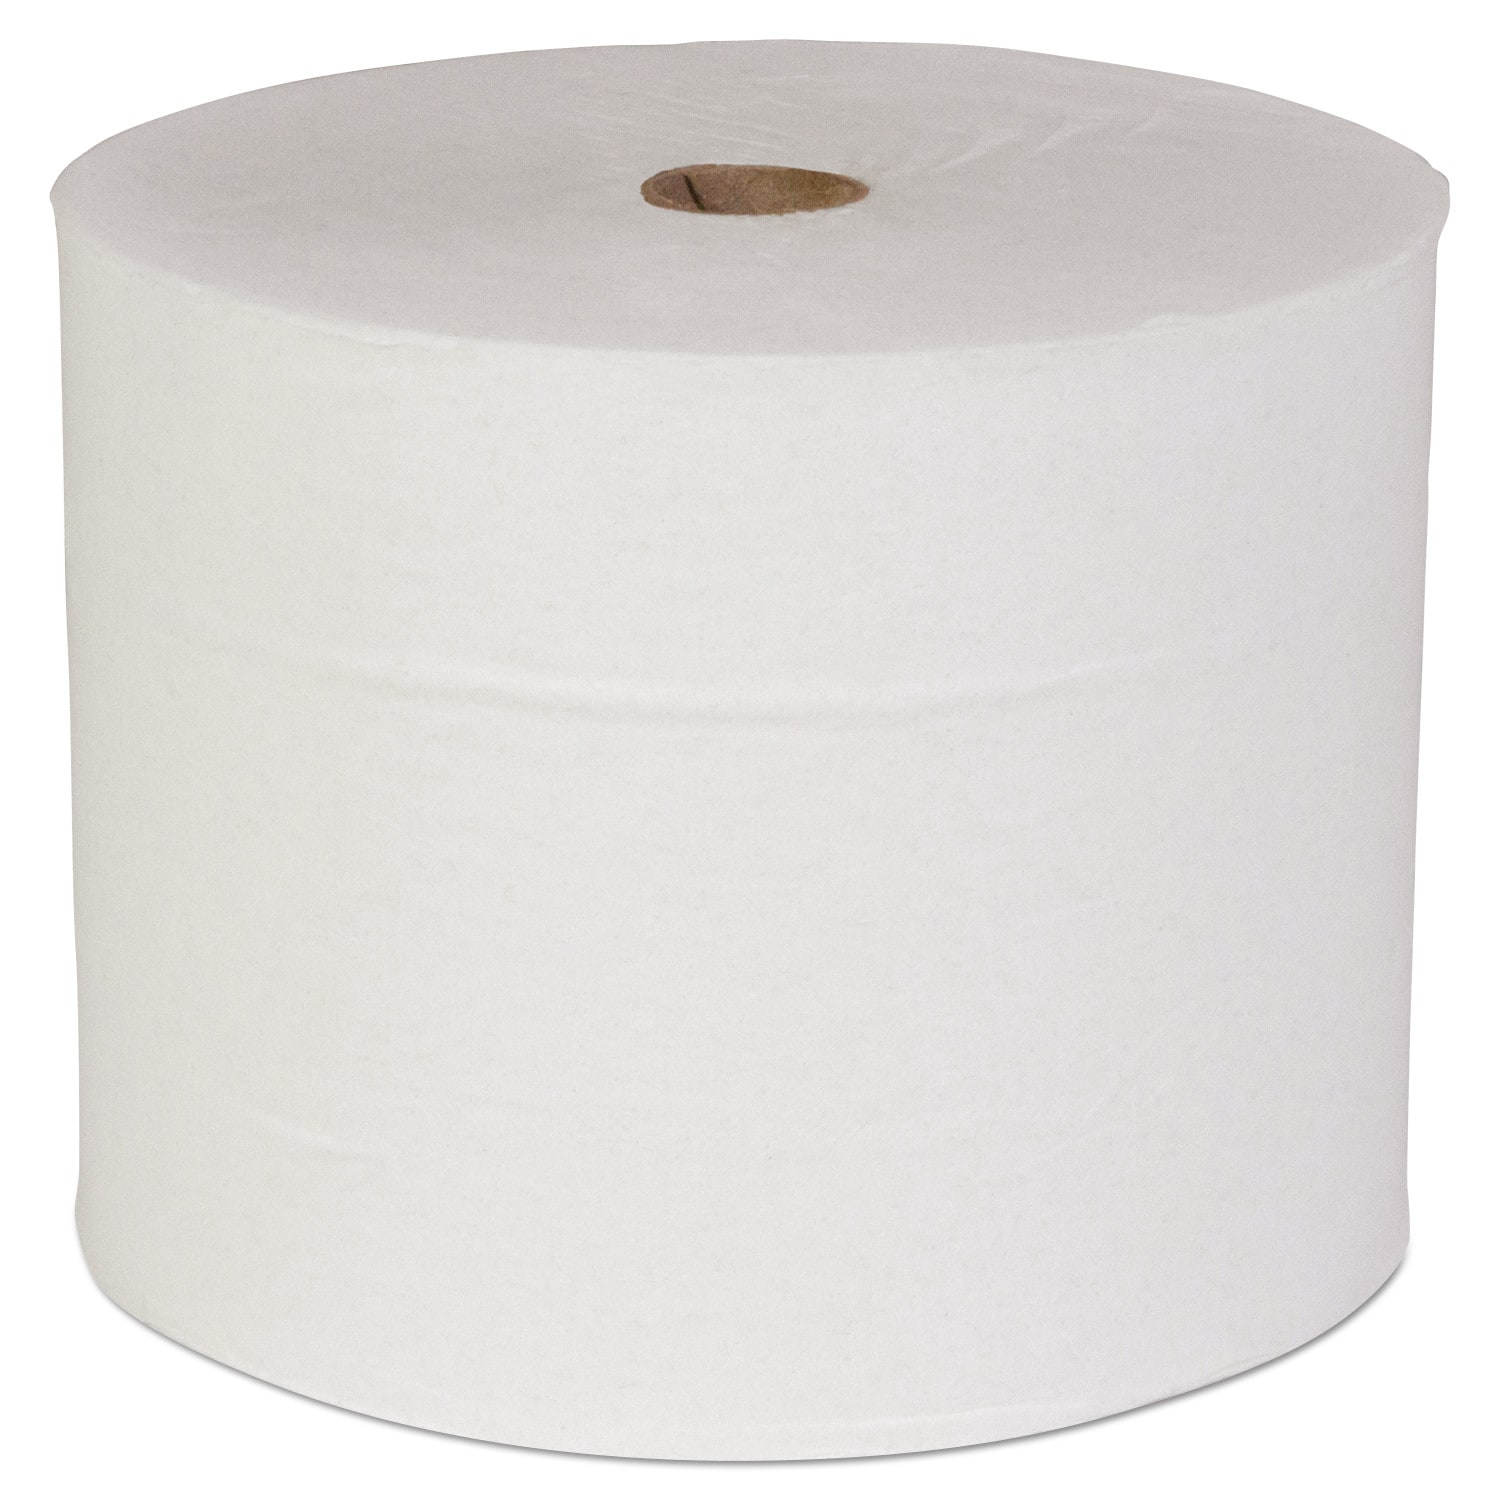 General Supply 2-Ply 9 inch Jumbo Roll Bath Tissue, White, (Pack of 12)